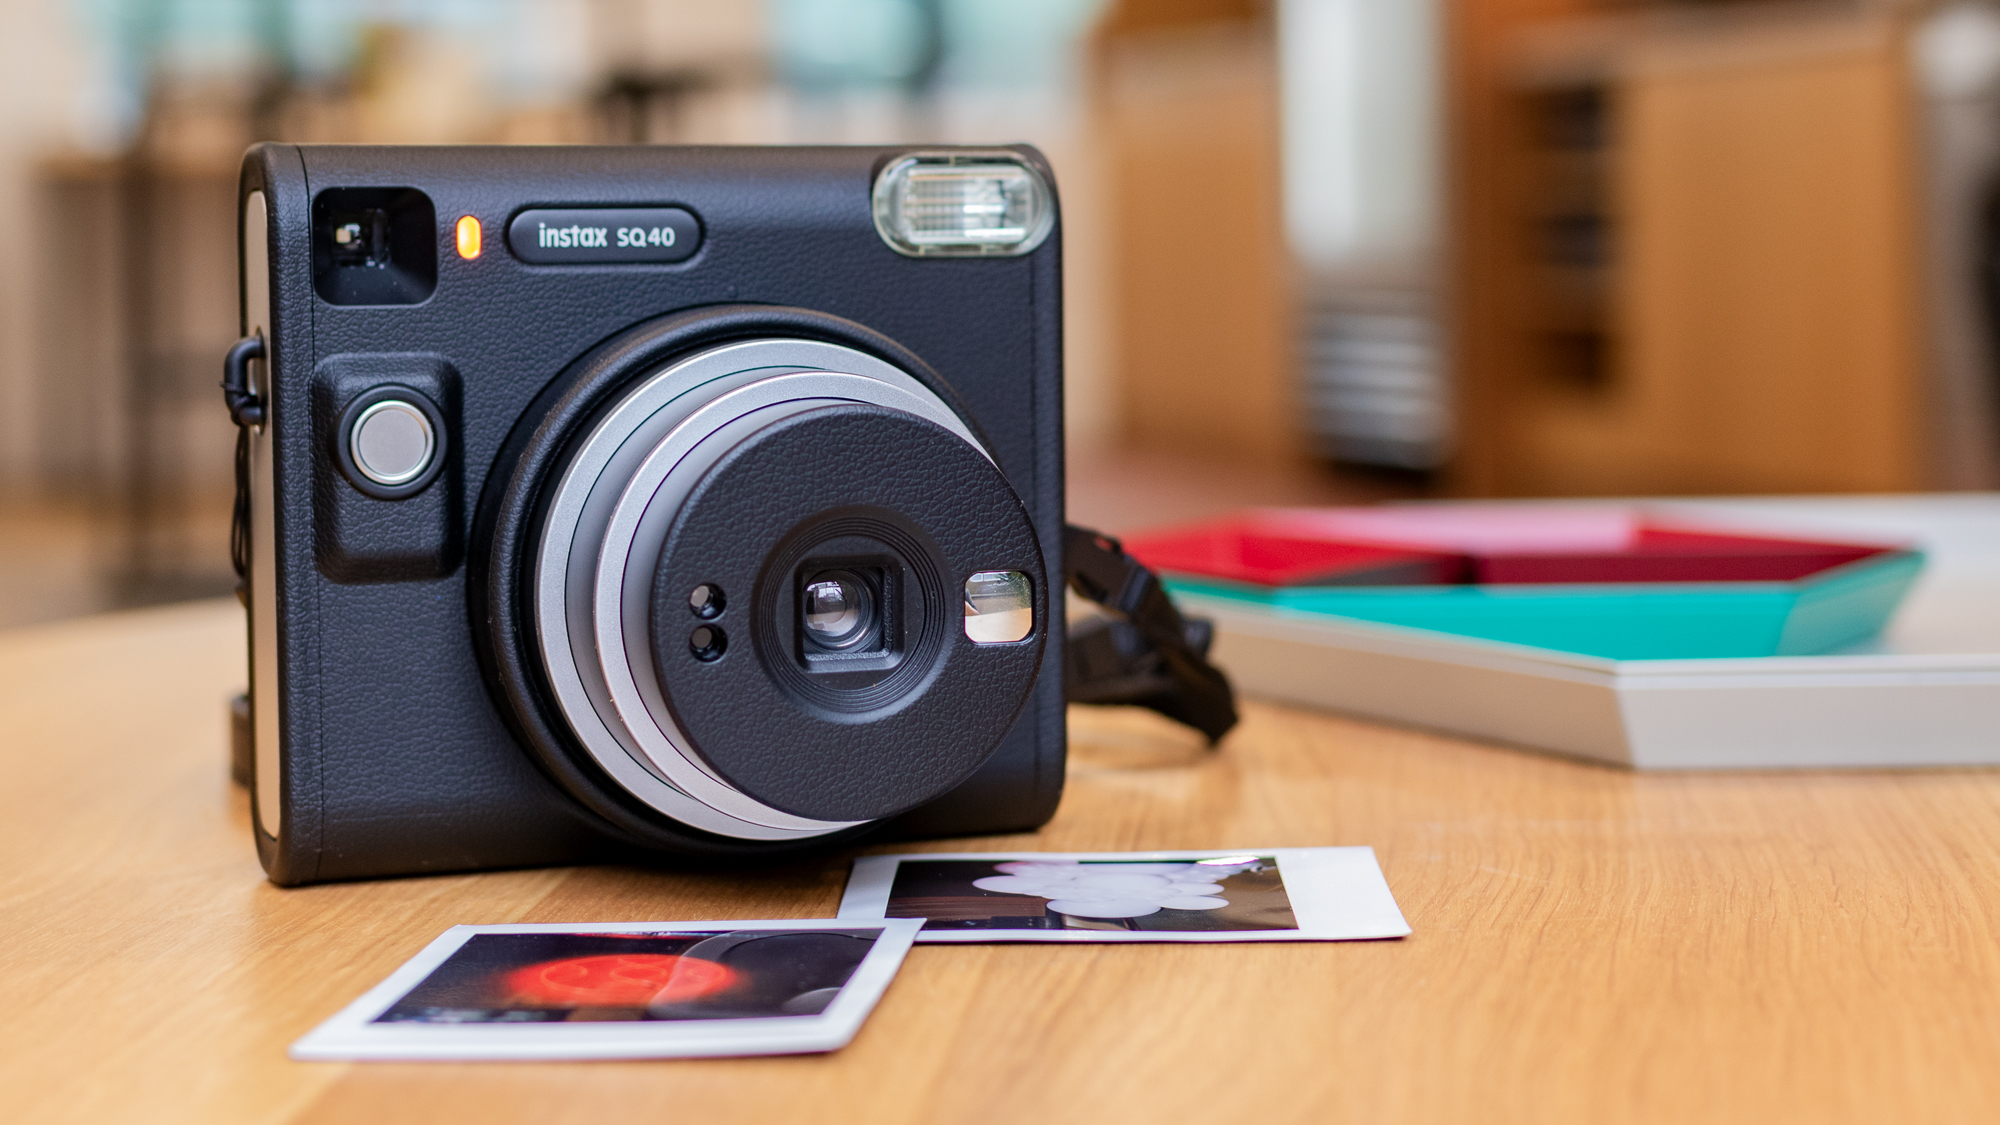 Fujifilm Instax SQ1 vs SQ6: Which is The Best Instant Film Camera? — Sonder  Creative - Commercial and Portrait Photography